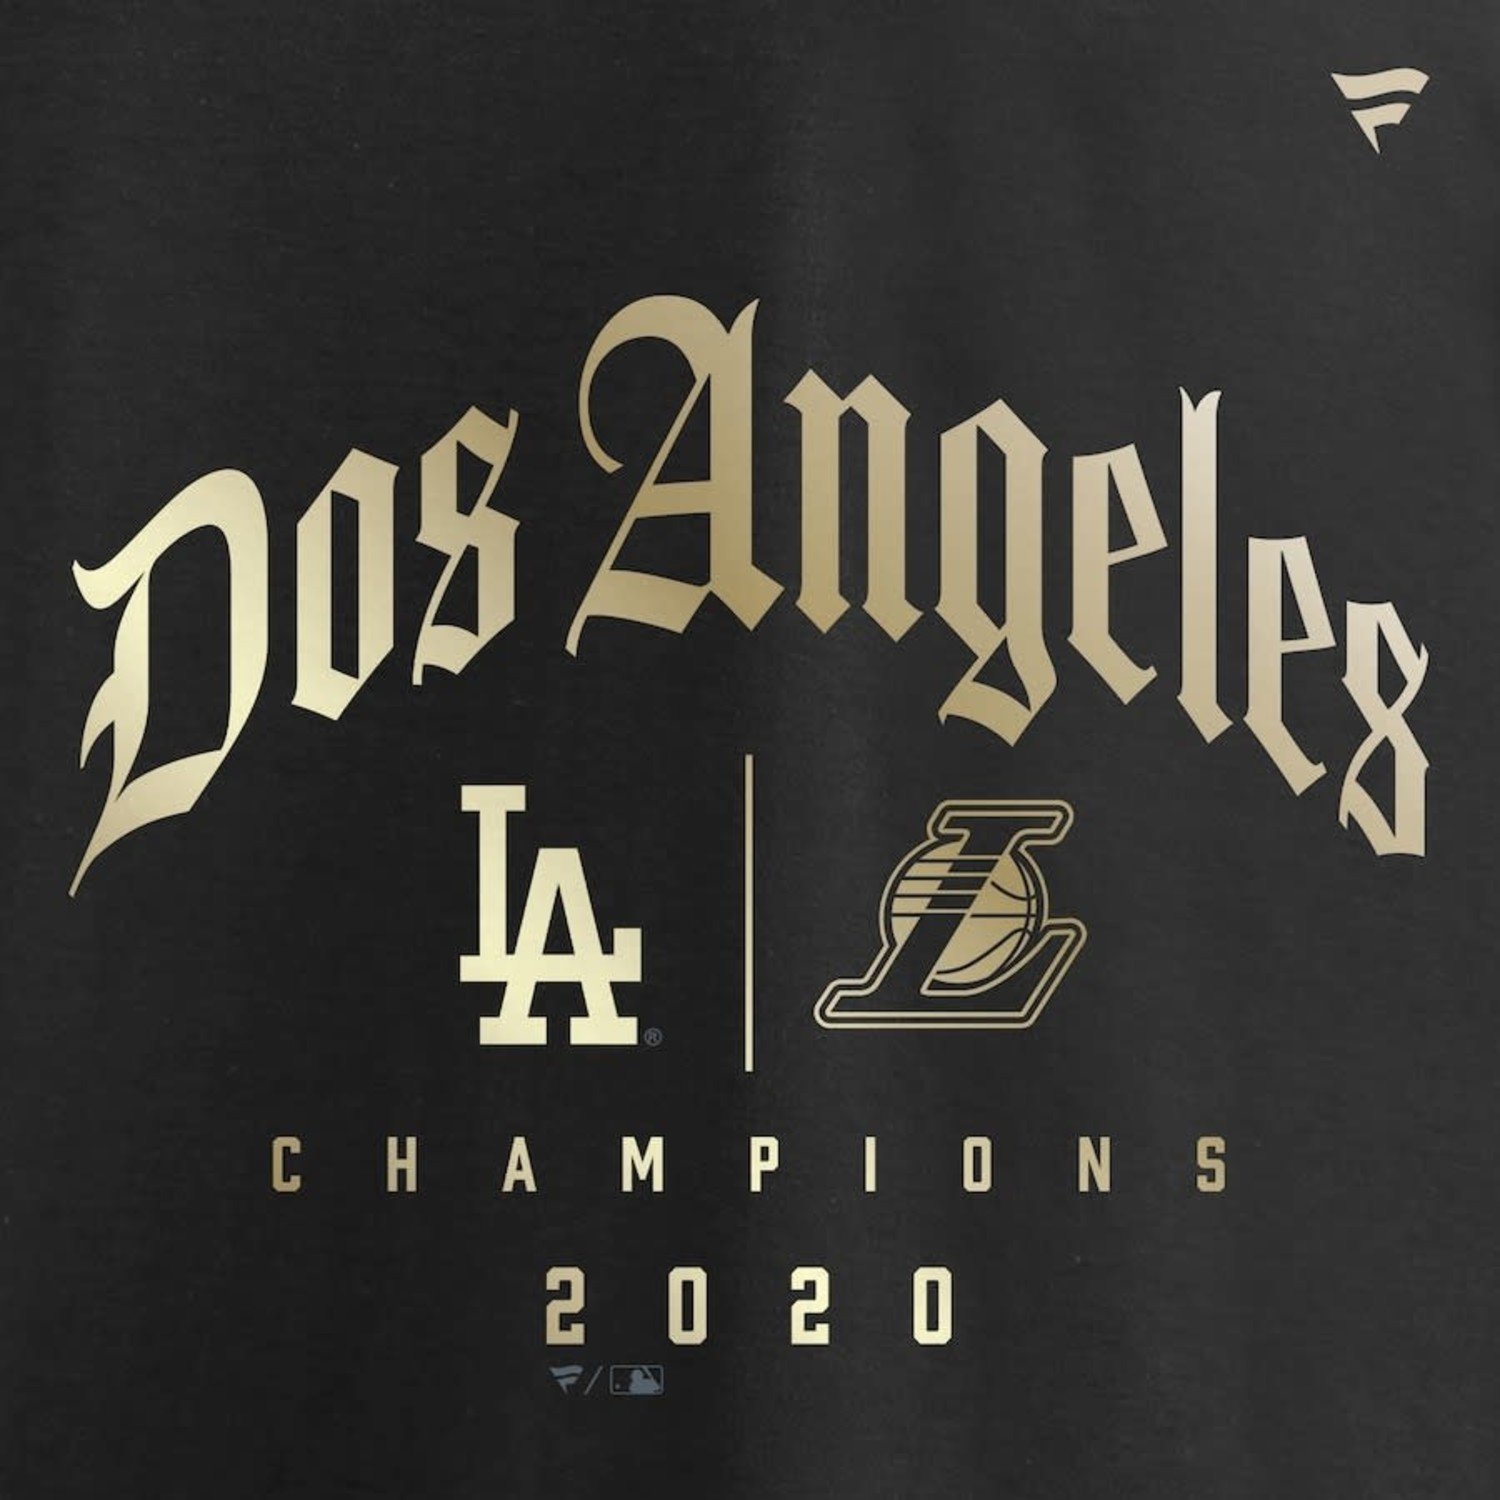 Lakers and Dodgers 2 Titles 2020 Championship Hoodie Grey All Over –  Collective Lifestyle